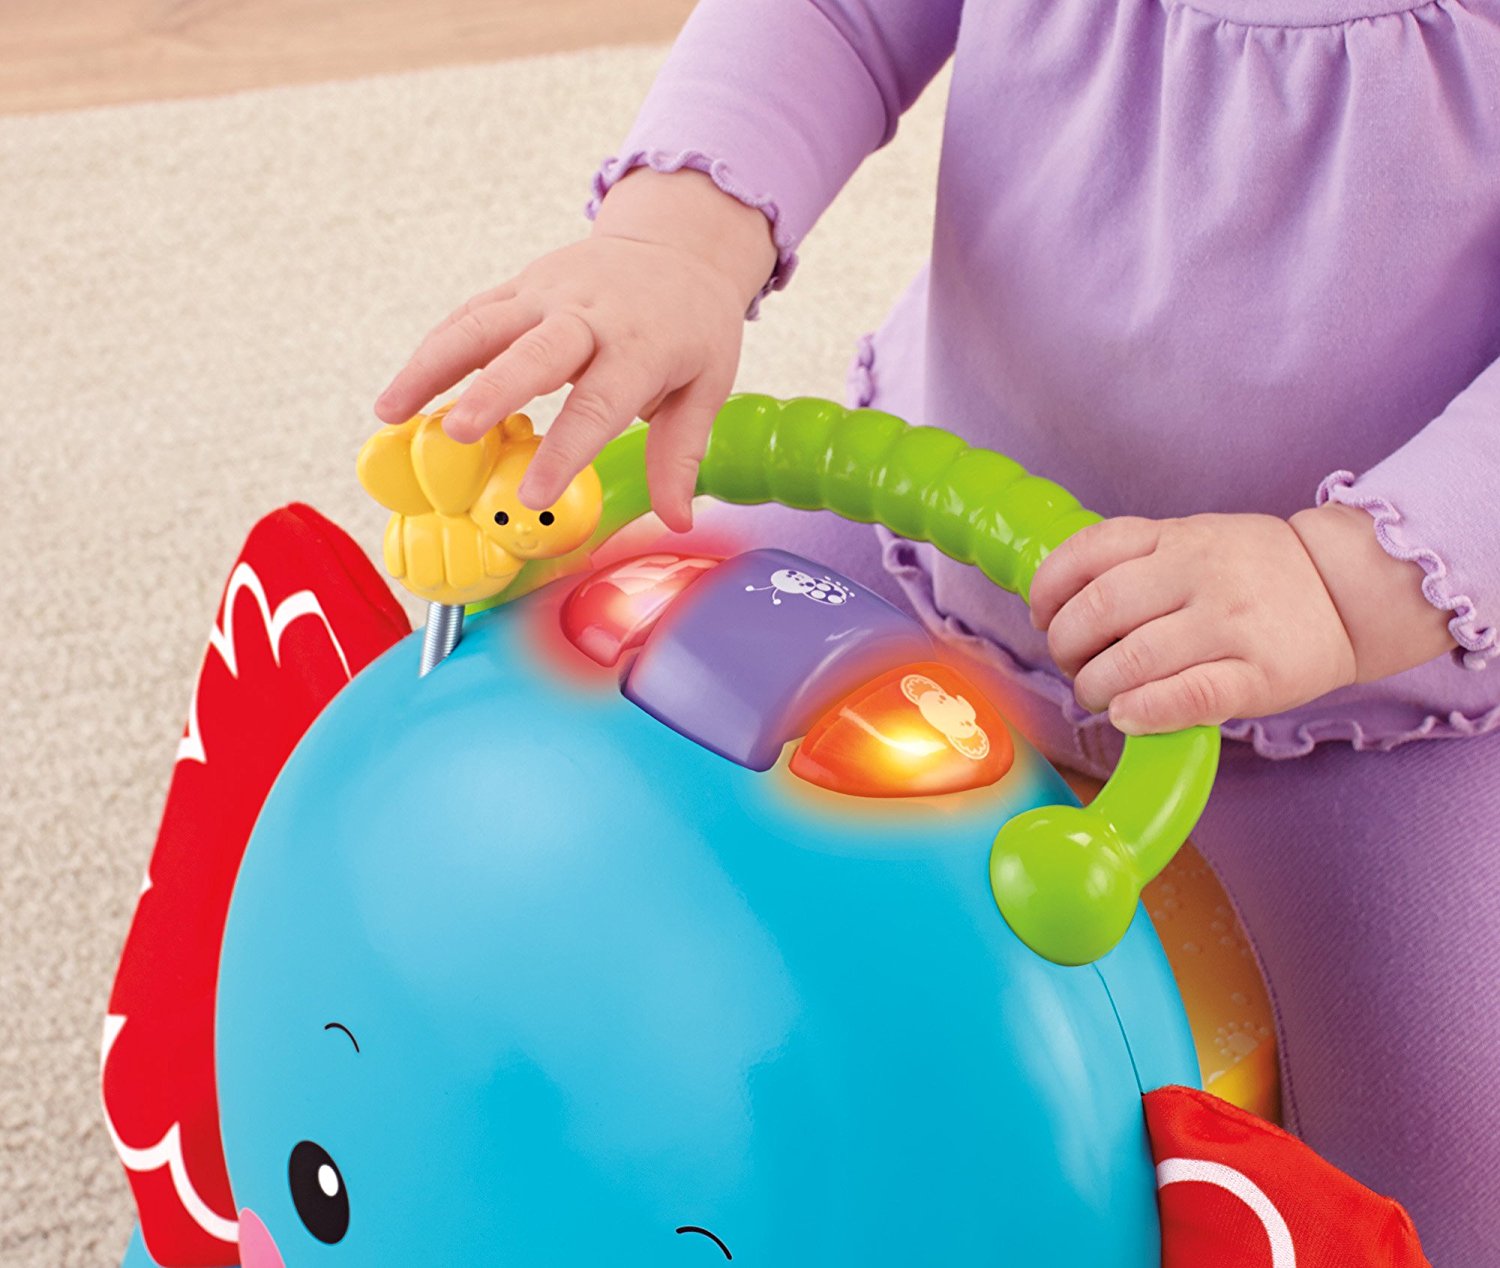 fisher price bounce stride and ride elephant